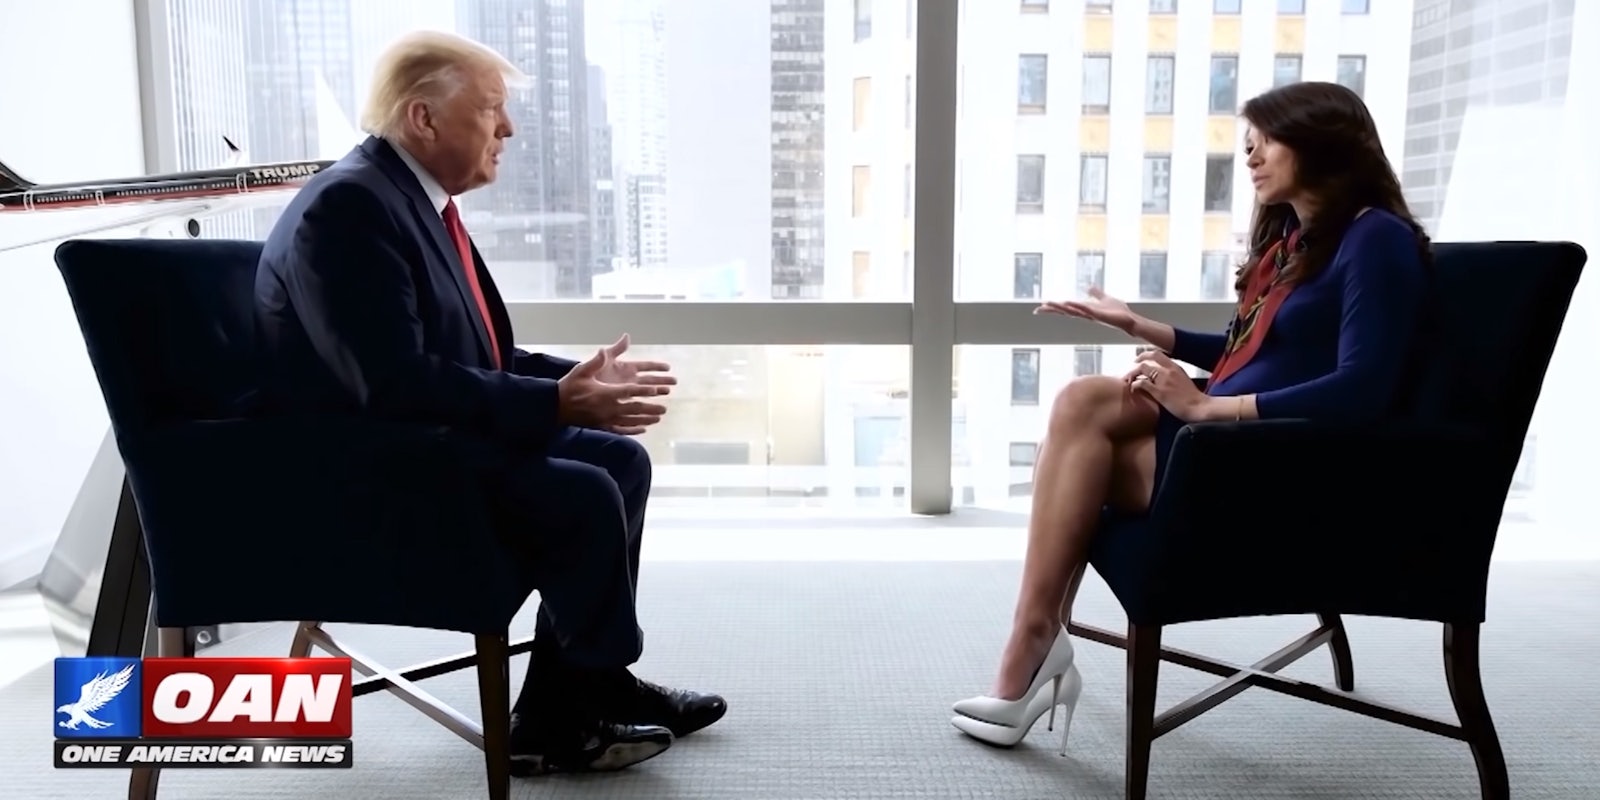 donald trump being interviewed by OAN reporter